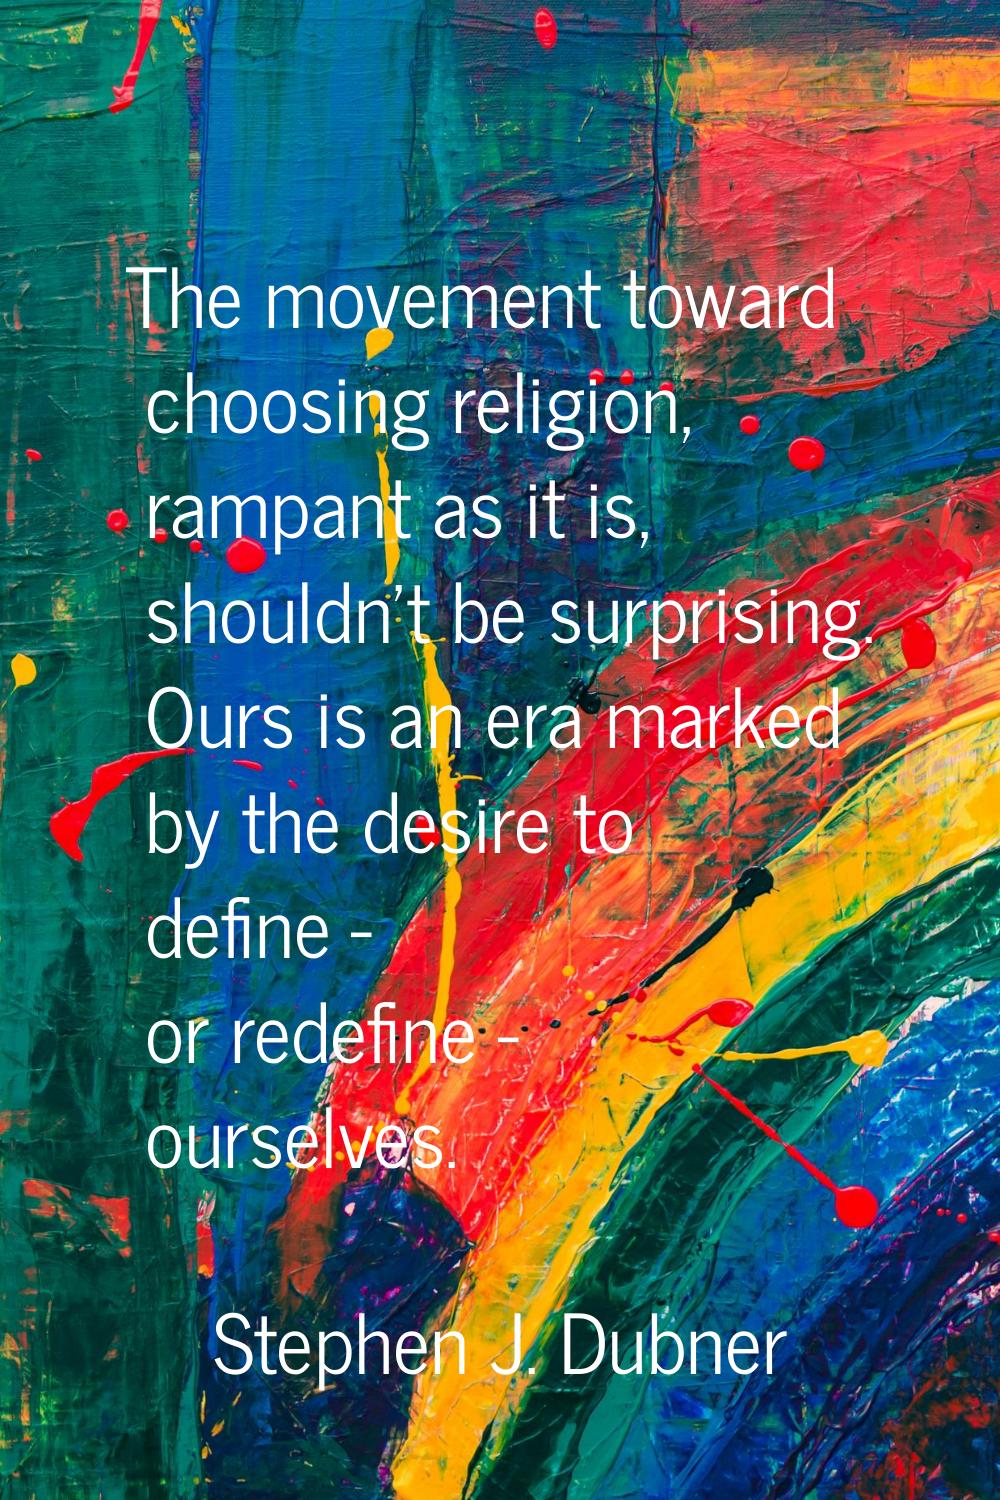 The movement toward choosing religion, rampant as it is, shouldn't be surprising. Ours is an era ma